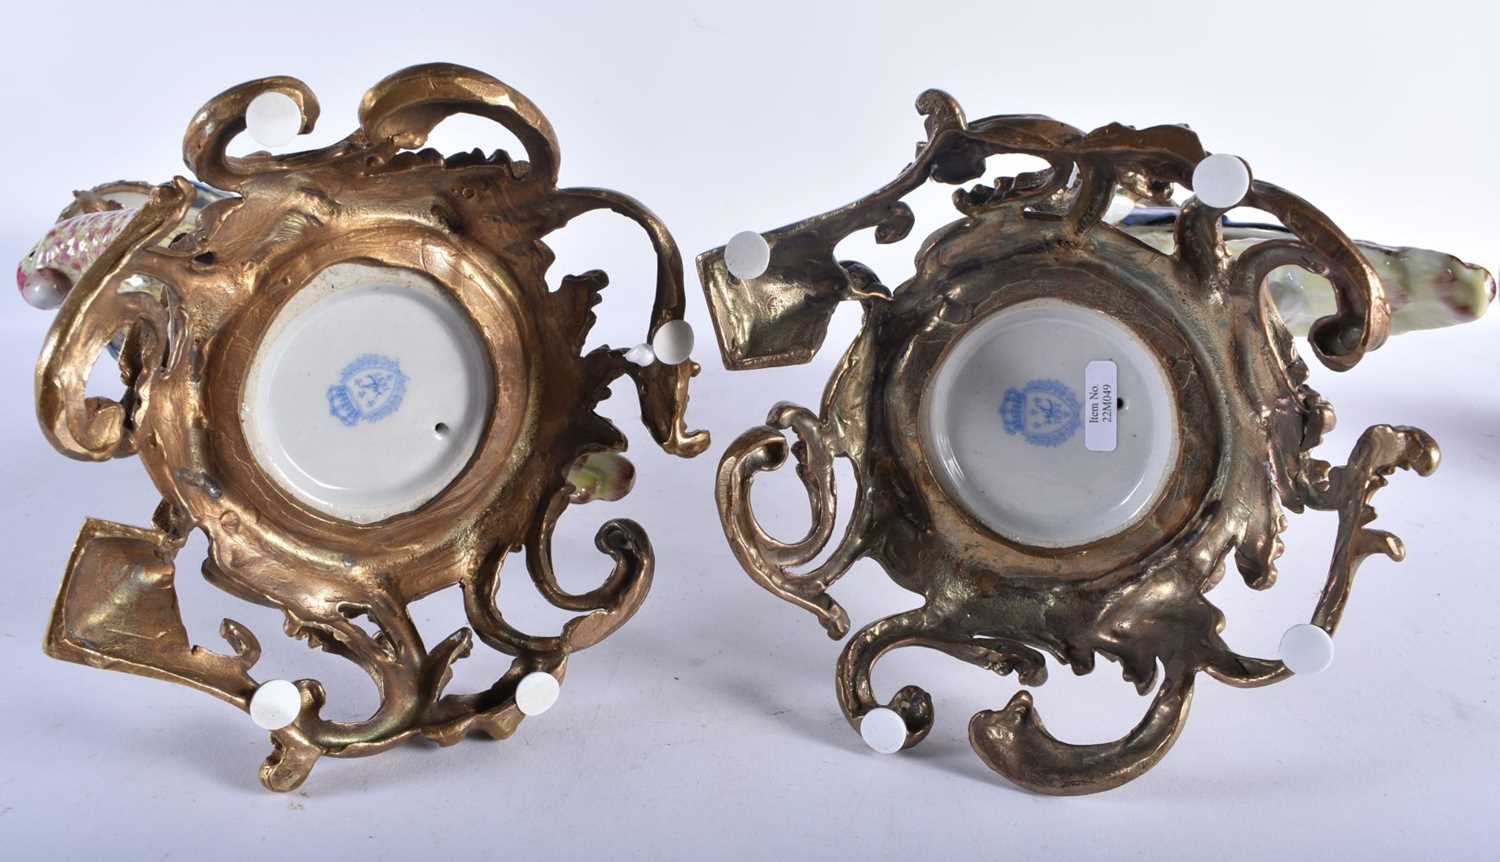 A LARGE PAIR OF CONTINENTAL PORCELAIN ORMOLU AND BRONZE PARROT CANDLESTICKS. 56 cm high. - Image 6 of 6